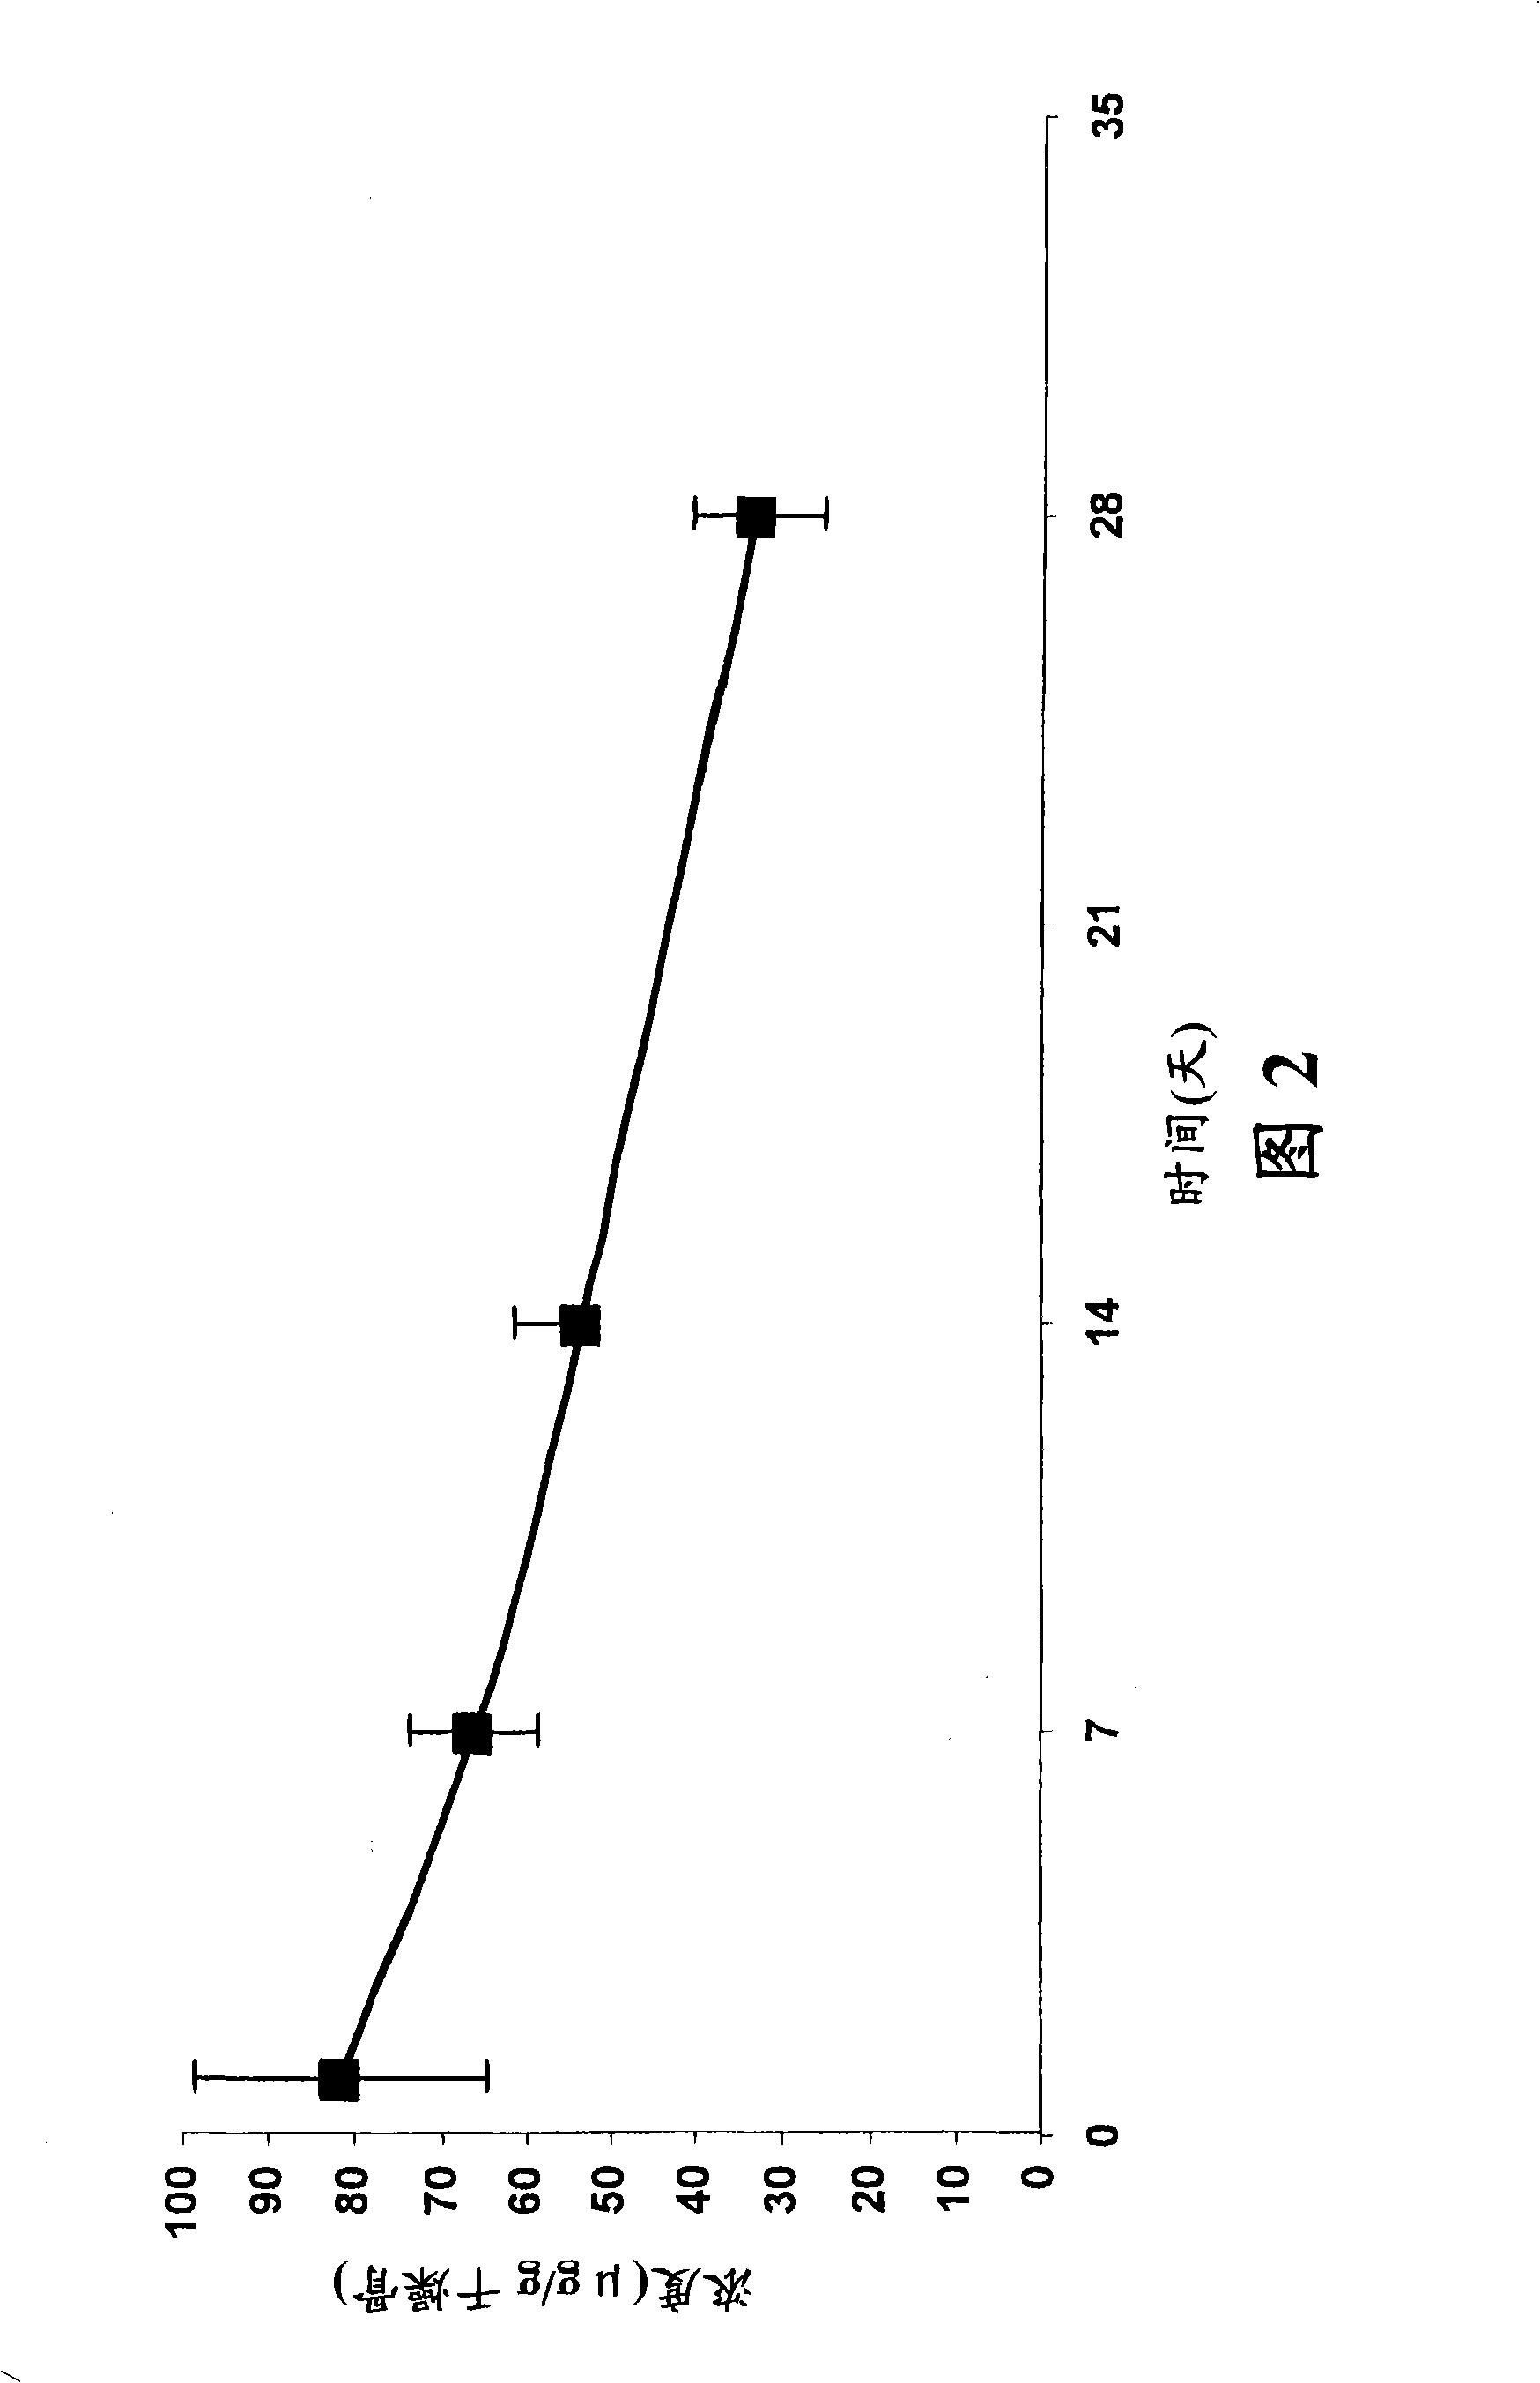 Phosphonated fluoroquinolones, antibacterial analogs thereof, and methods for the prevention and treatment of bone and joint infections